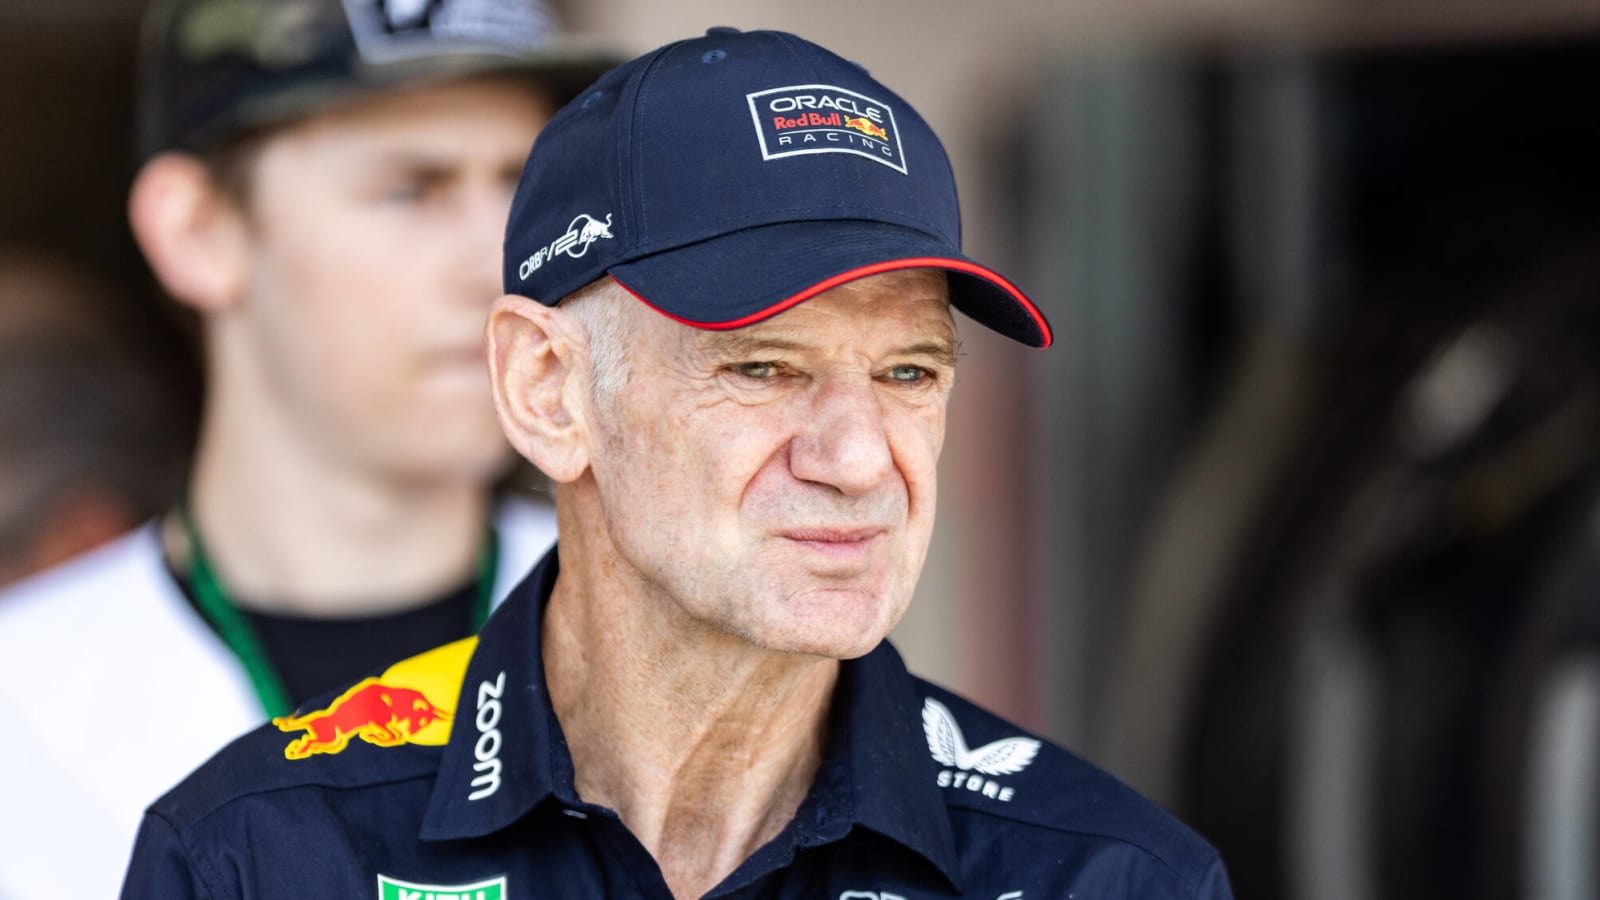 Adrian Newey breaks silence on Christian Horner’s claims of ‘hating’ regulation changes